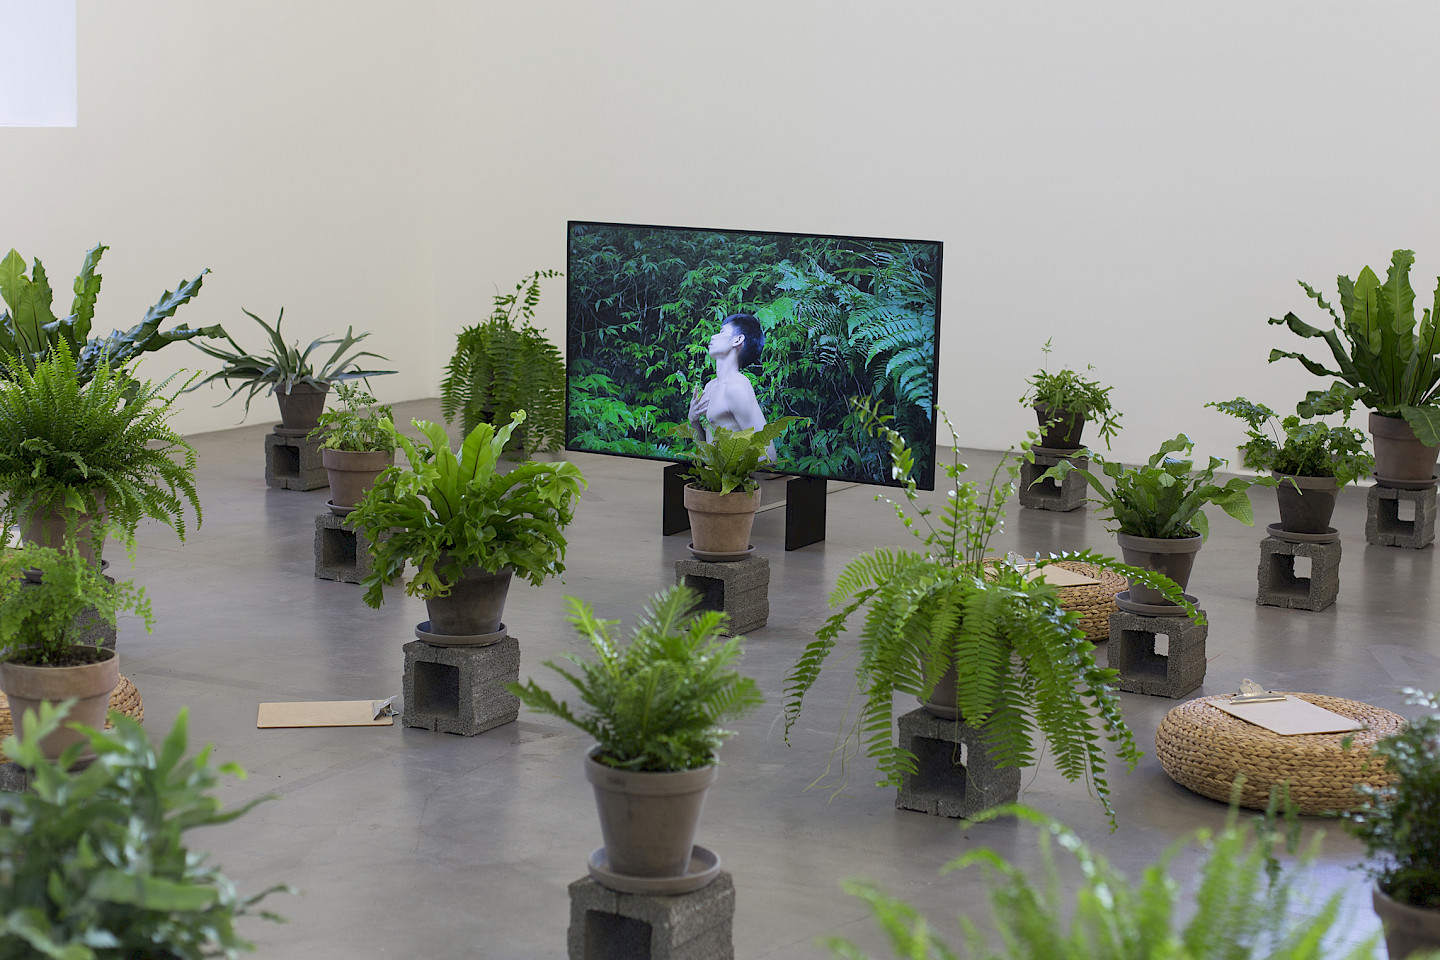 Zheng Bo, Pteridophilia 1, 2016, Videostill, Courtesy the artist and Edouard Malingue Gallery; Fern as Method, 2019, Courtesy the artist and Kyoto City University of Arts, Kyoto; Foto: Anaïs Stein